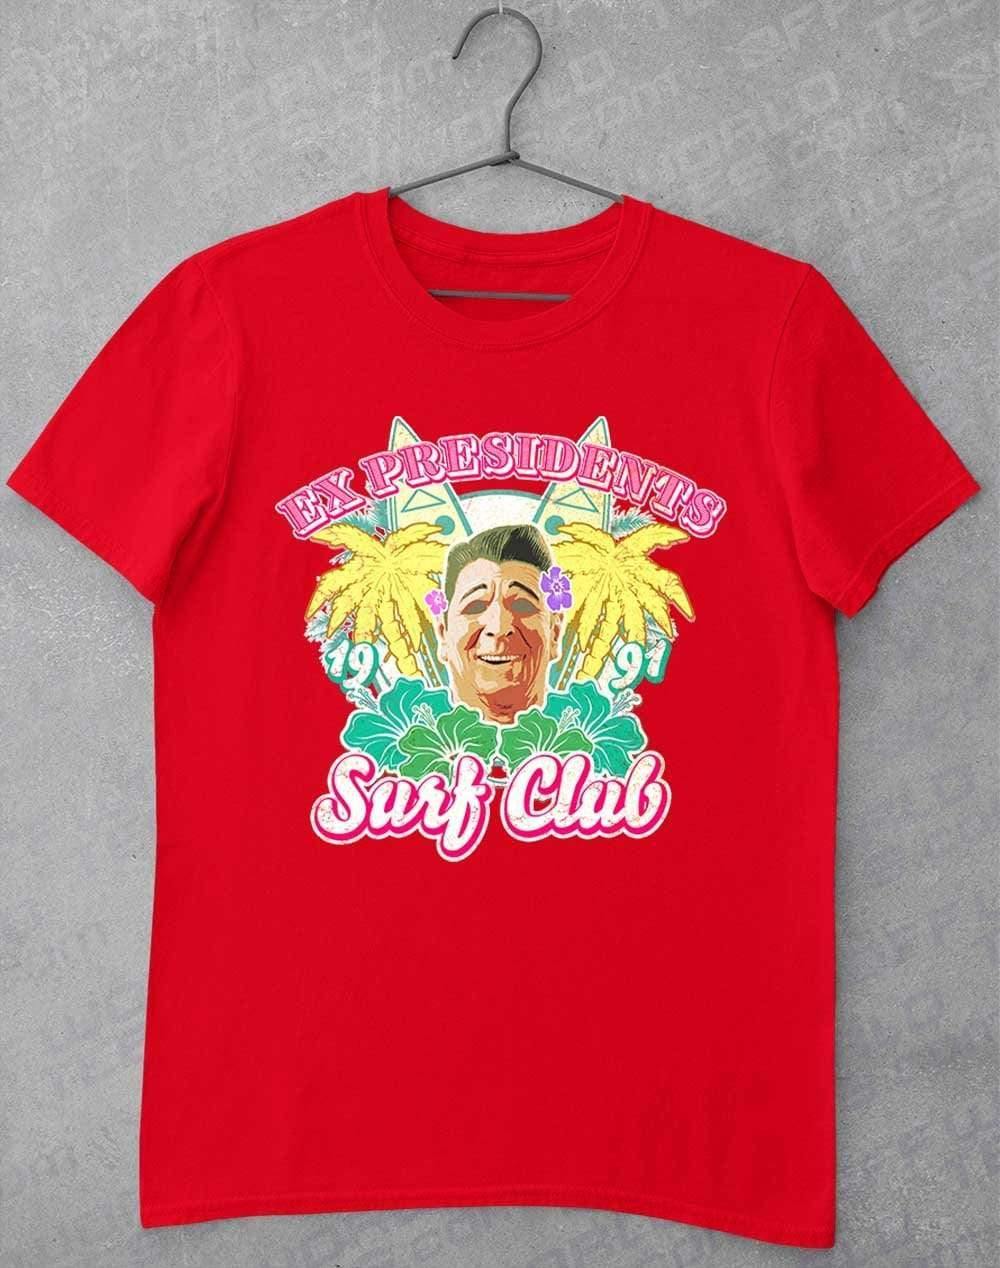 Ex Presidents Surf Club T-Shirt S / Red  - Off World Tees